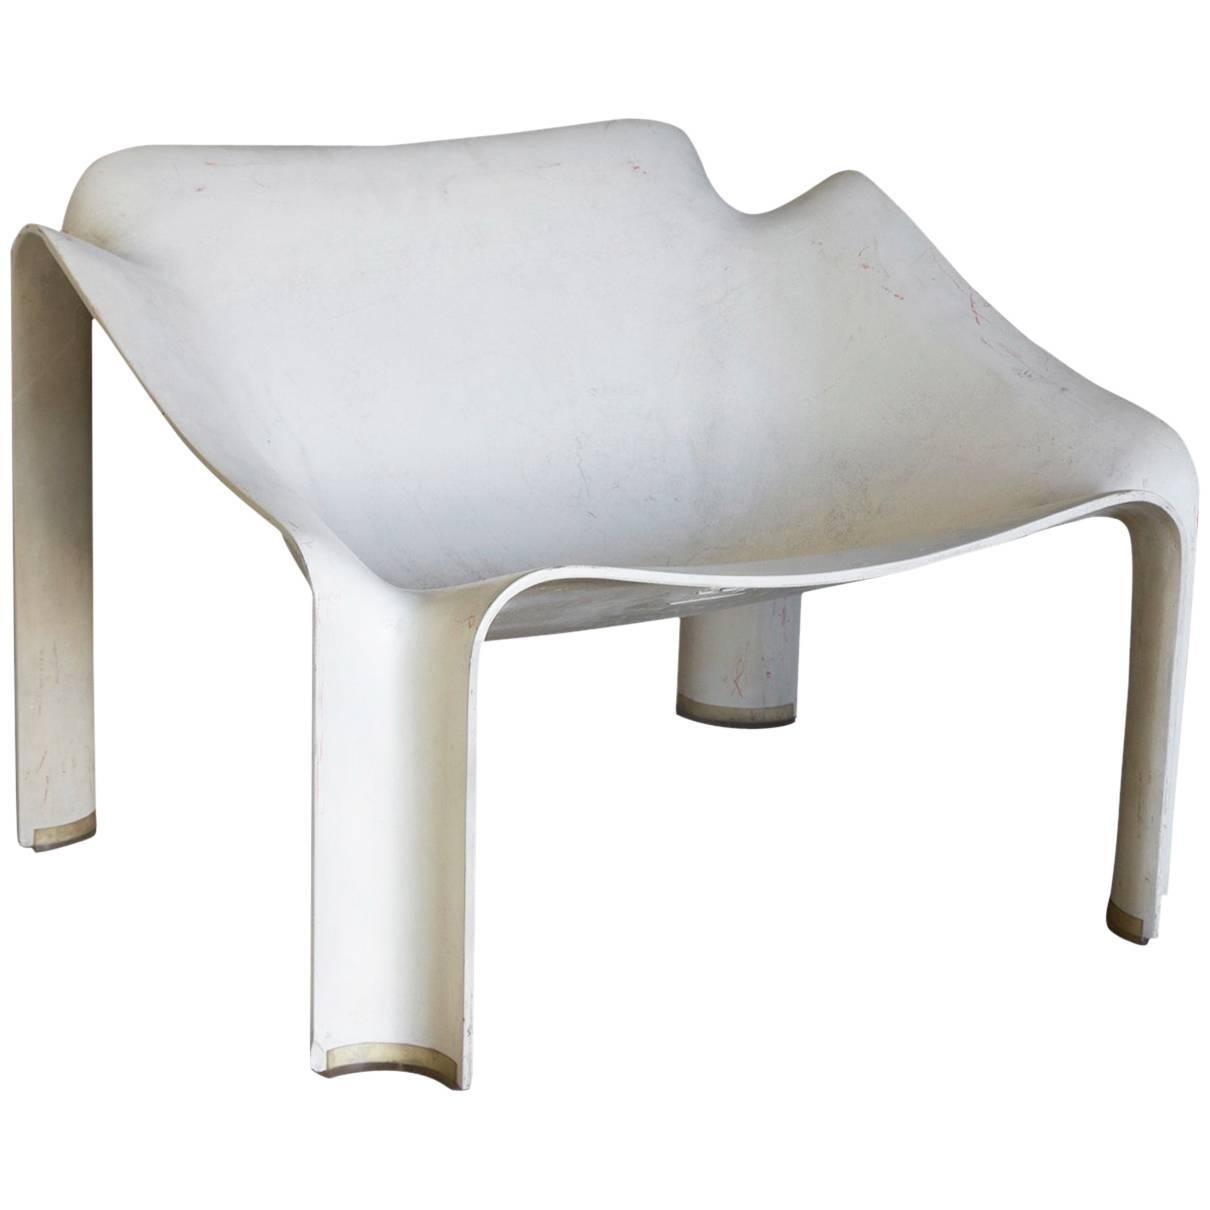 1963, Pierre Paulin, Early F303 Lounge Chair in Cream / White for Artifort